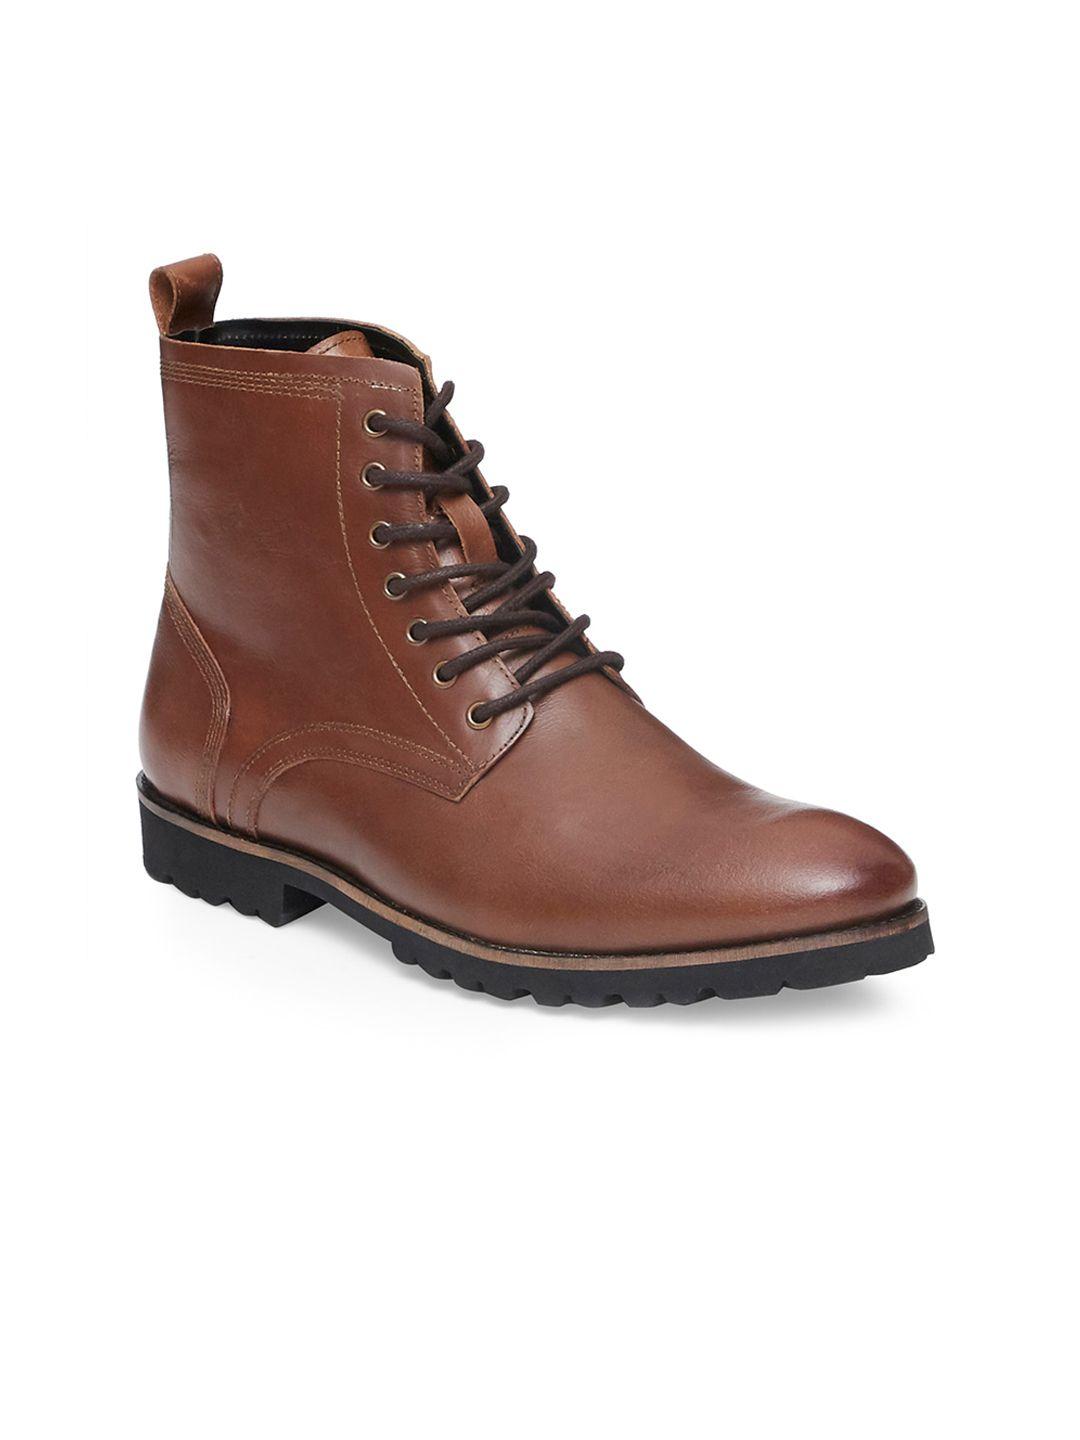 hats-off-accessories-men-brown-solid-high-top-leather-boots